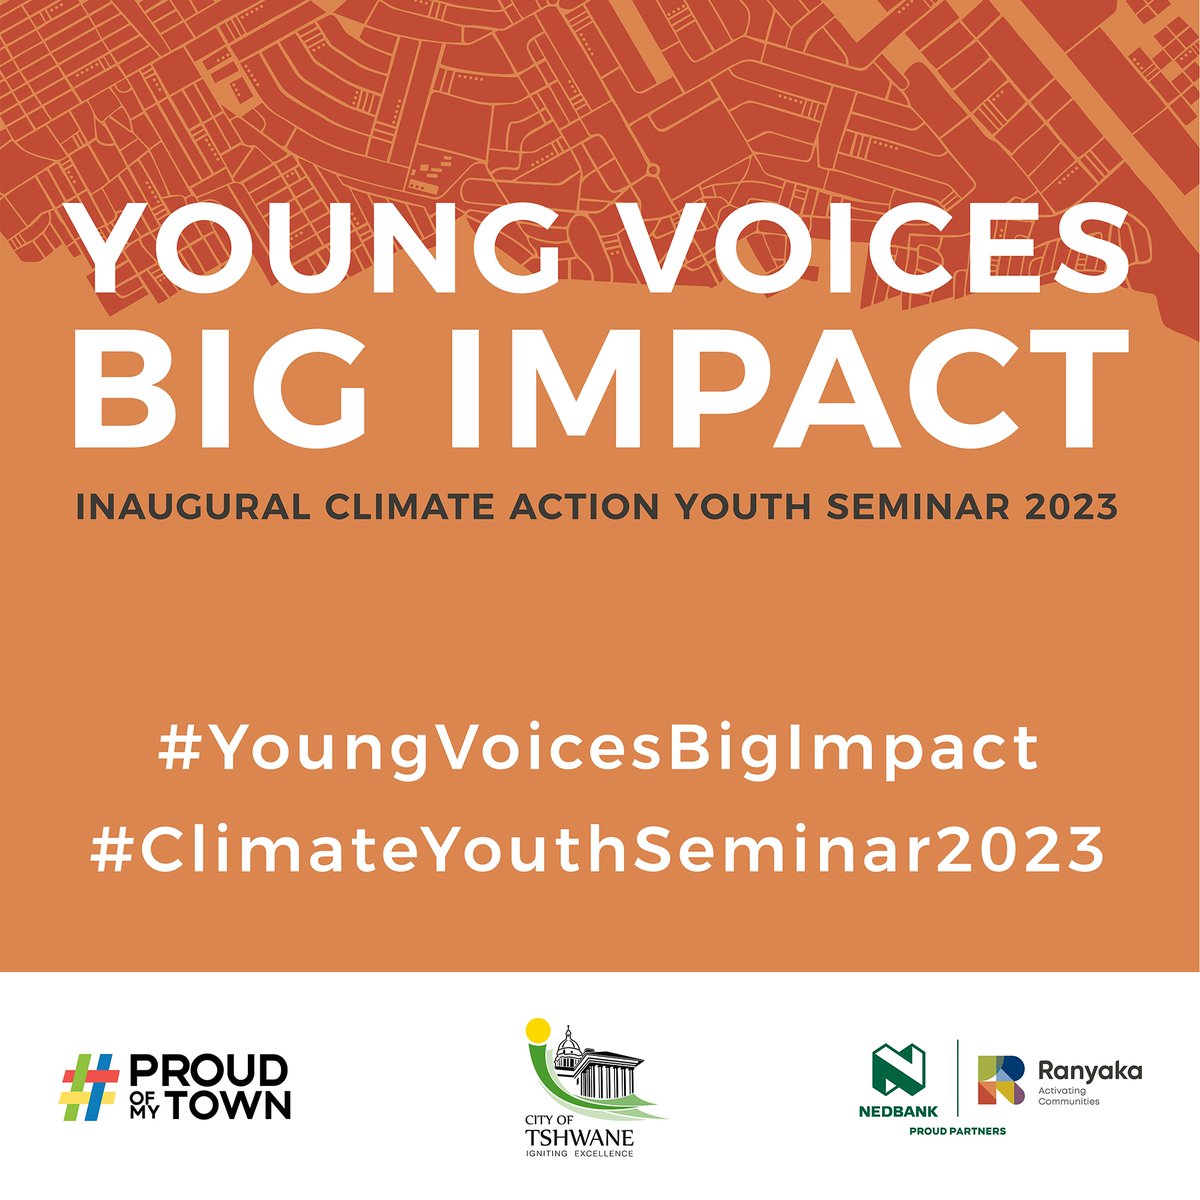 TODAY IS THE DAY! We are excited to meet all the inspiring young people, speakers, panelists and exhibitors who will be participating in the Inaugural Tshwane Youth Climate Action Seminar today! Watch our page for updates 🎉 #YoungVoicesBigImpact #ClimateYouthSeminar2023